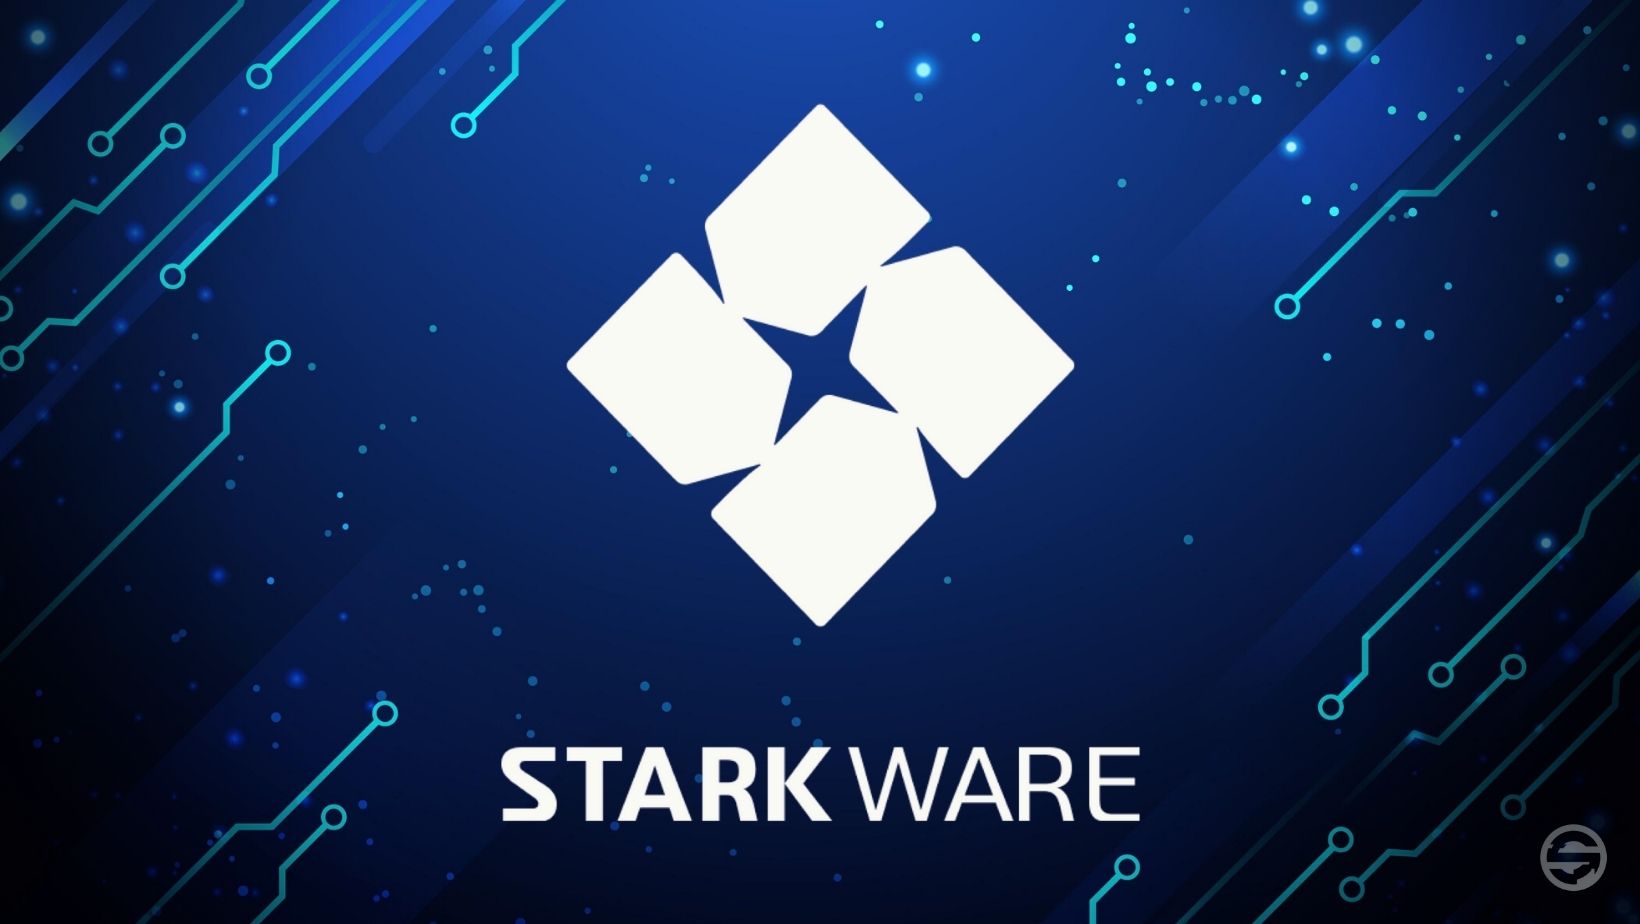 StarkNet: Starkware’s answer to the problems of blockchain